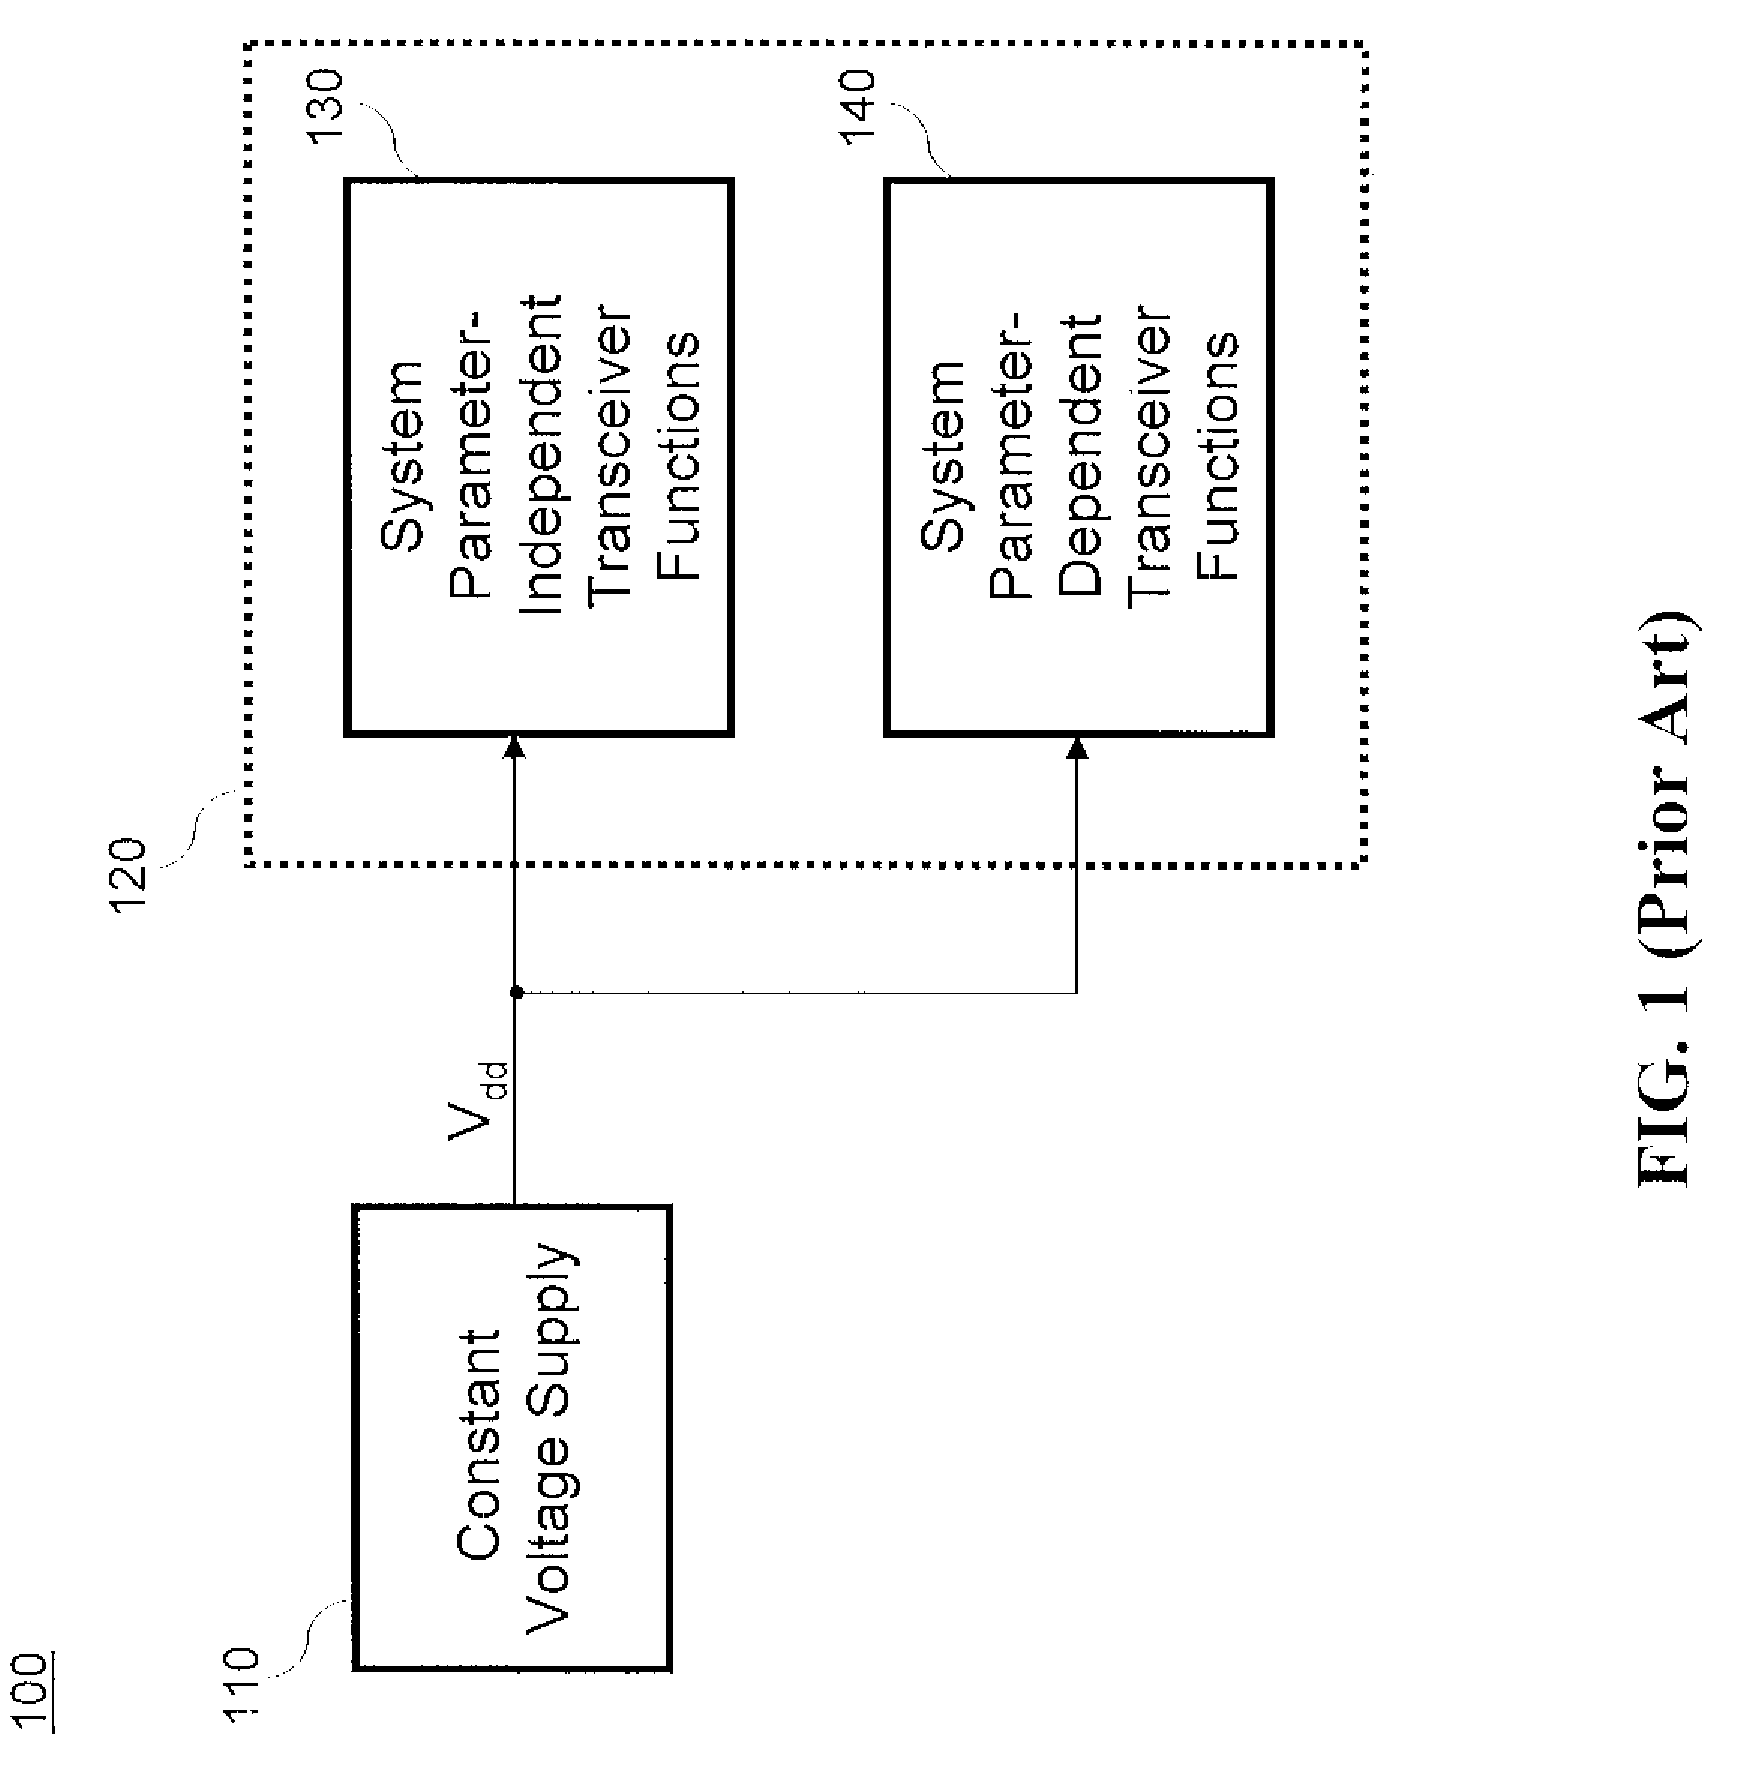 Dynamic voltage scaling for packet-based data communication systems